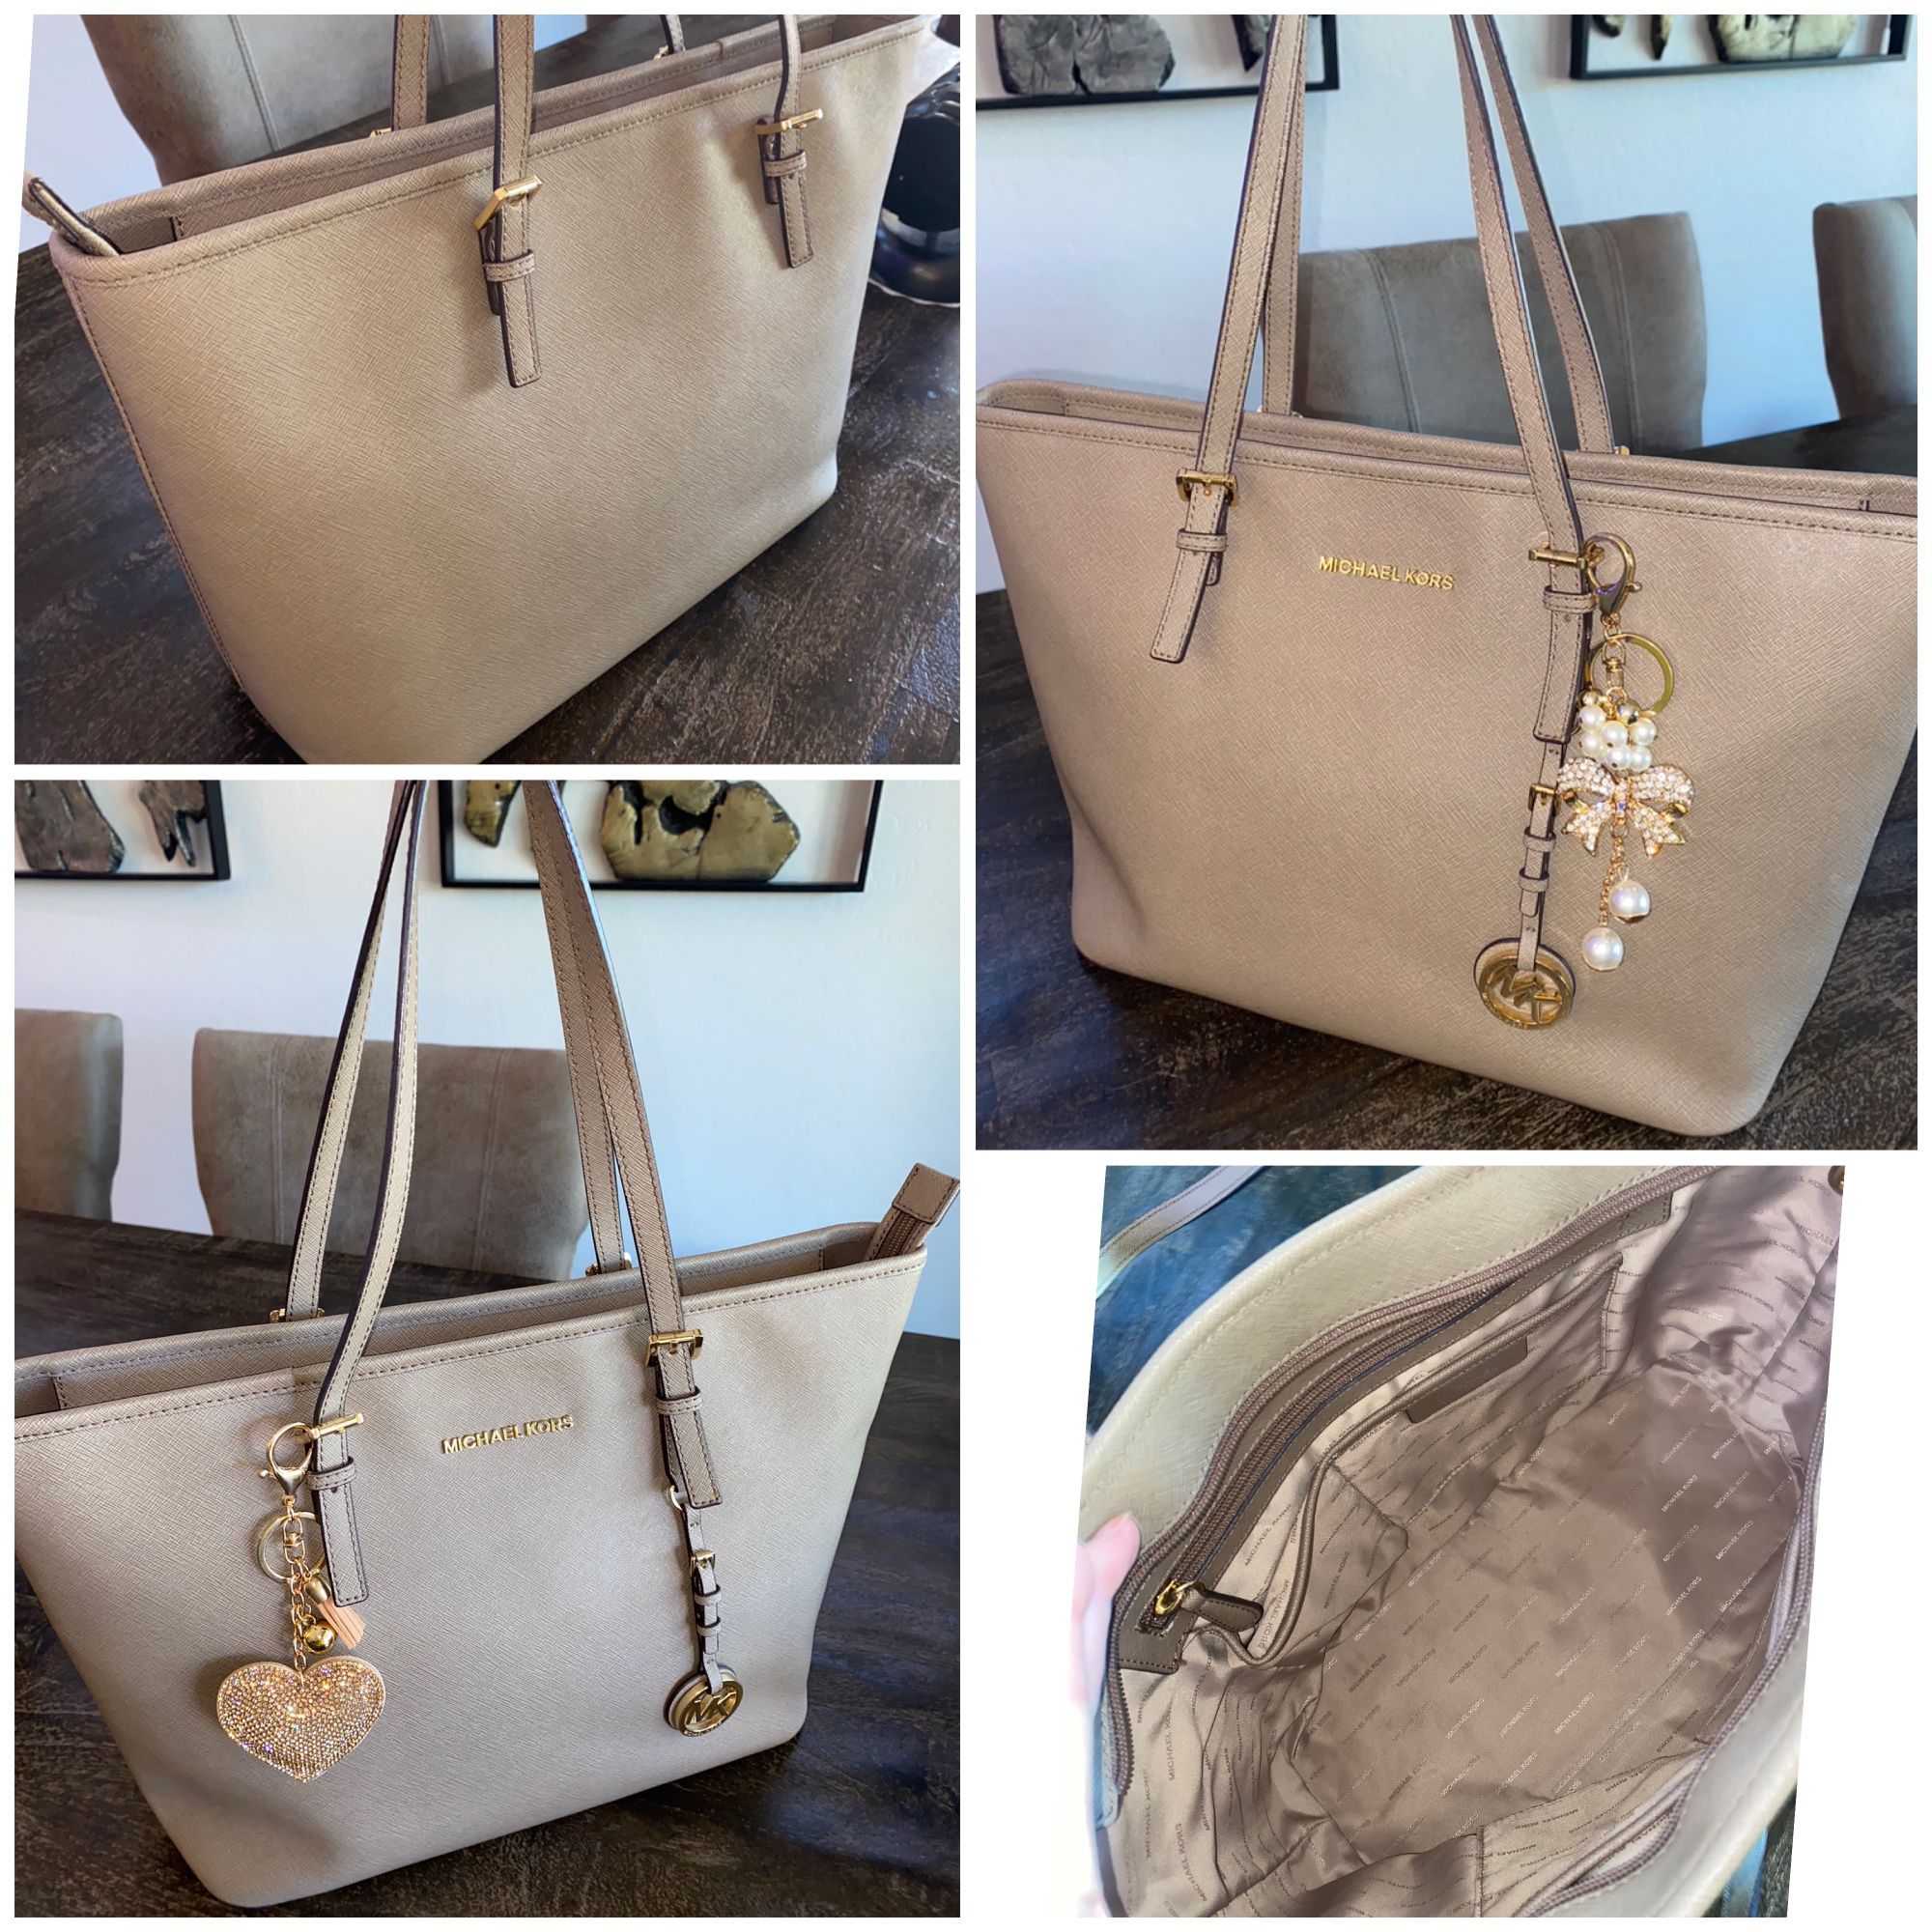 Micheal Kors tote, AS NEW 💥 Neutral taupe